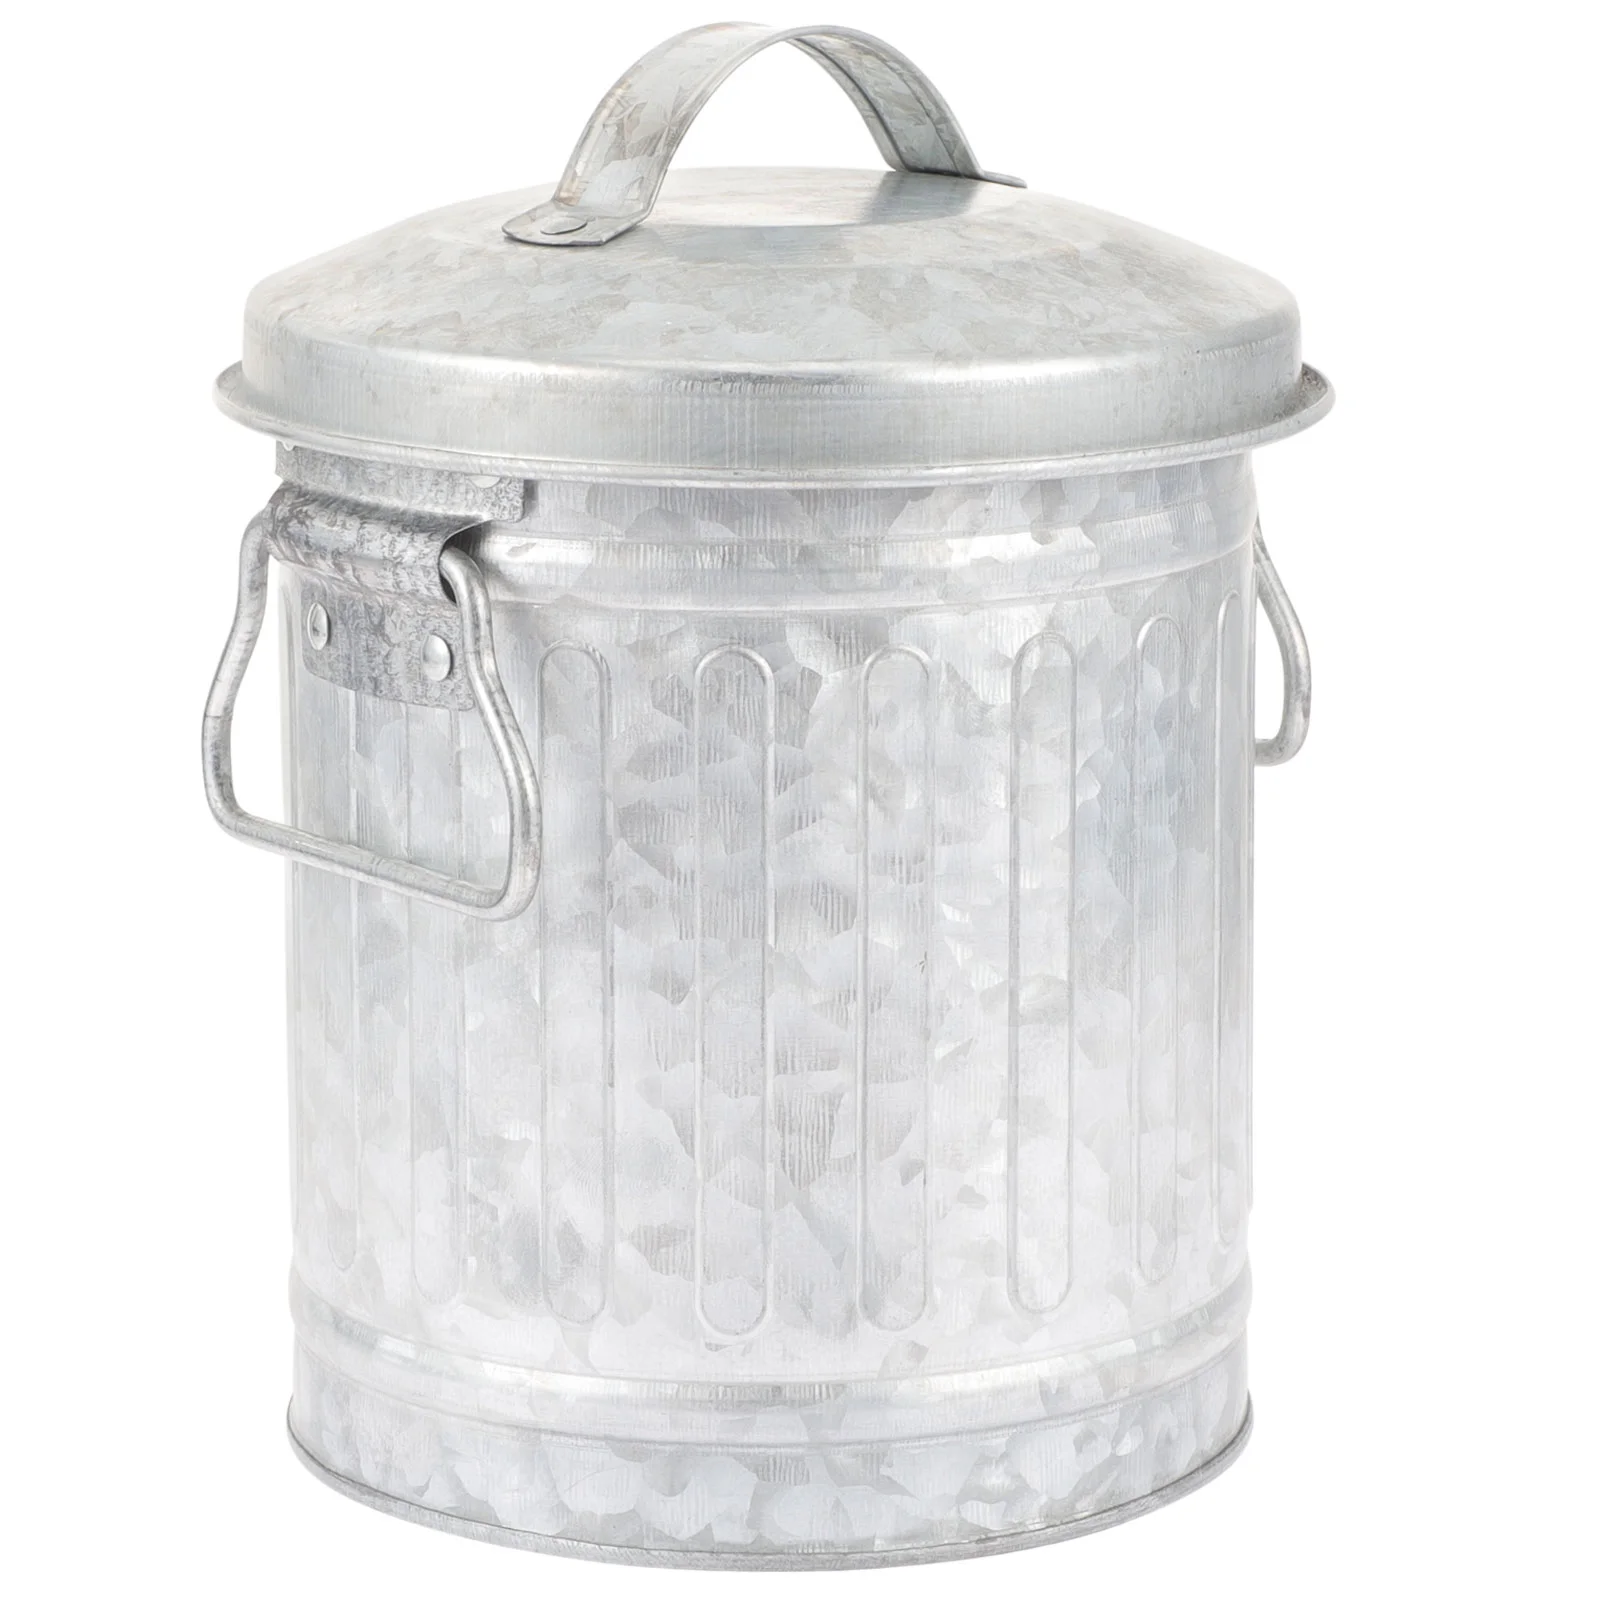 

Possible output: "Ash Bucket Lid Galvanized Iron Metal Fireplace Charcoal Can Coal Small Trash Pen Storage Kitchen Compost Bin